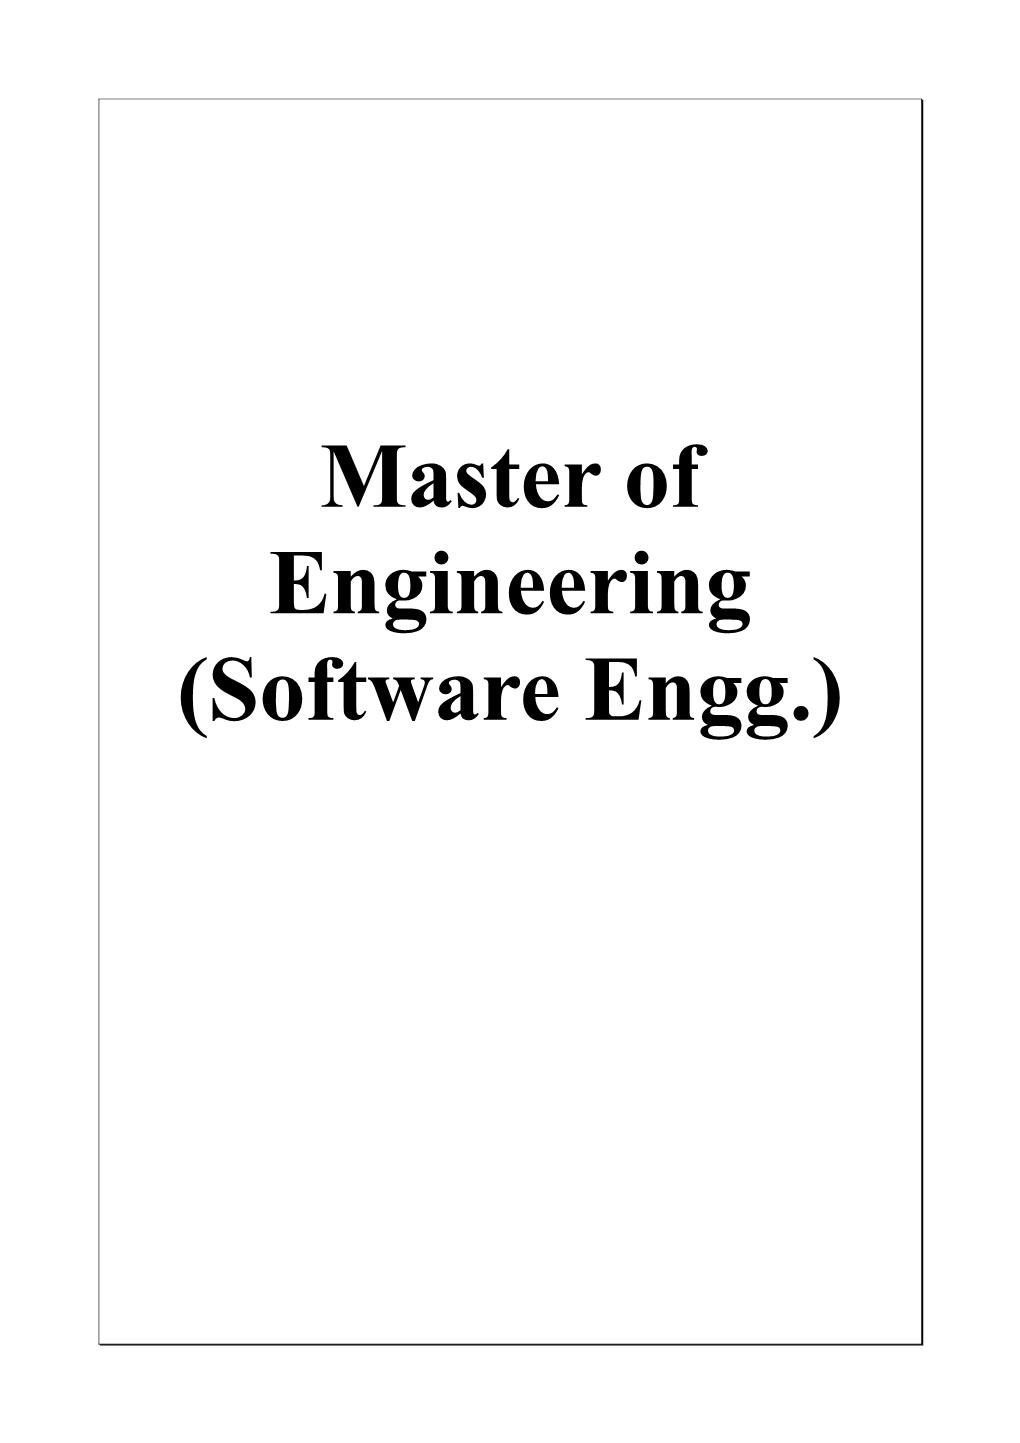 Master of Engineering (Software Engg.)